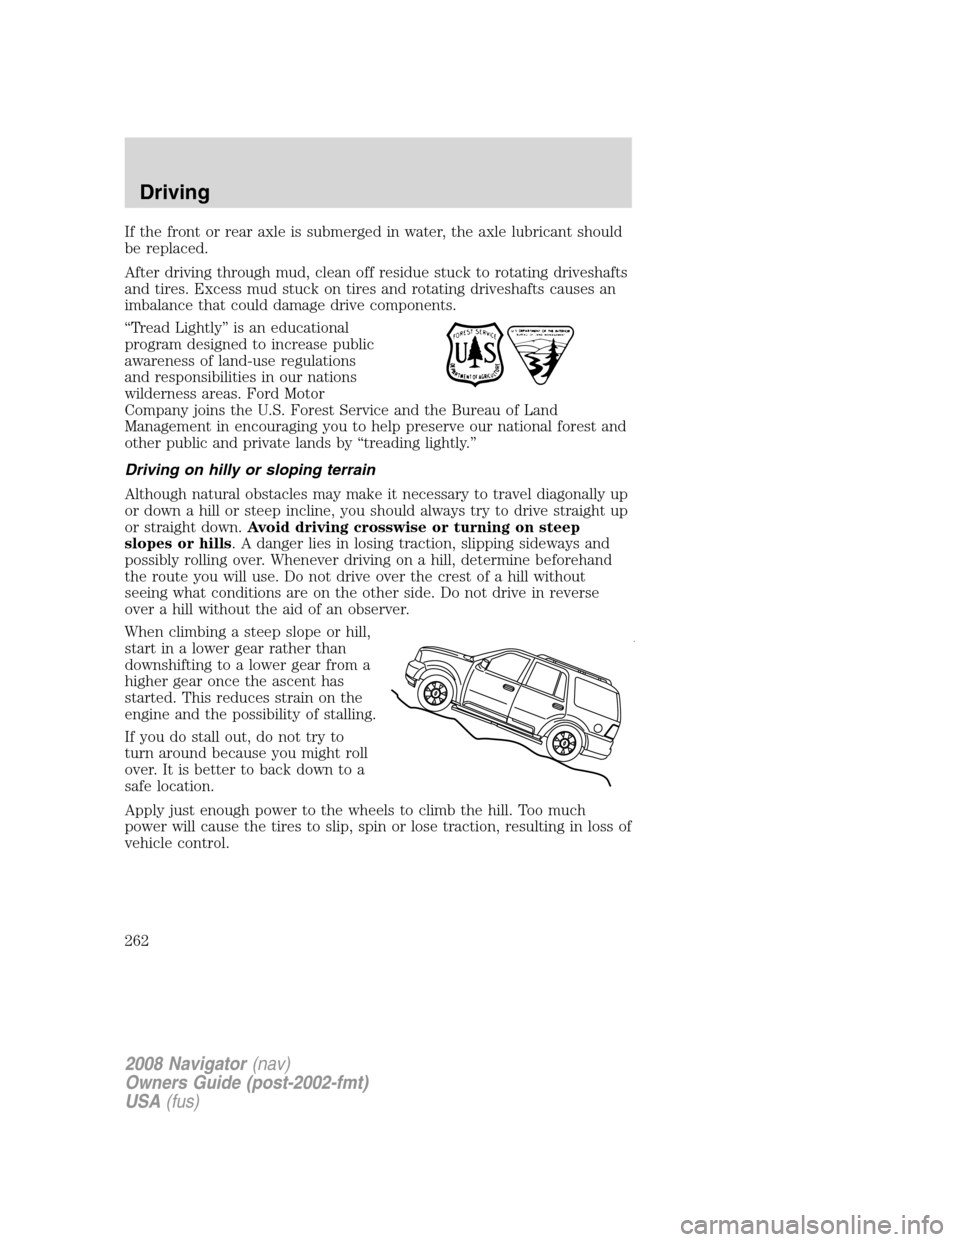 LINCOLN NAVIGATOR 2008 User Guide If the front or rear axle is submerged in water, the axle lubricant should
be replaced.
After driving through mud, clean off residue stuck to rotating driveshafts
and tires. Excess mud stuck on tires 